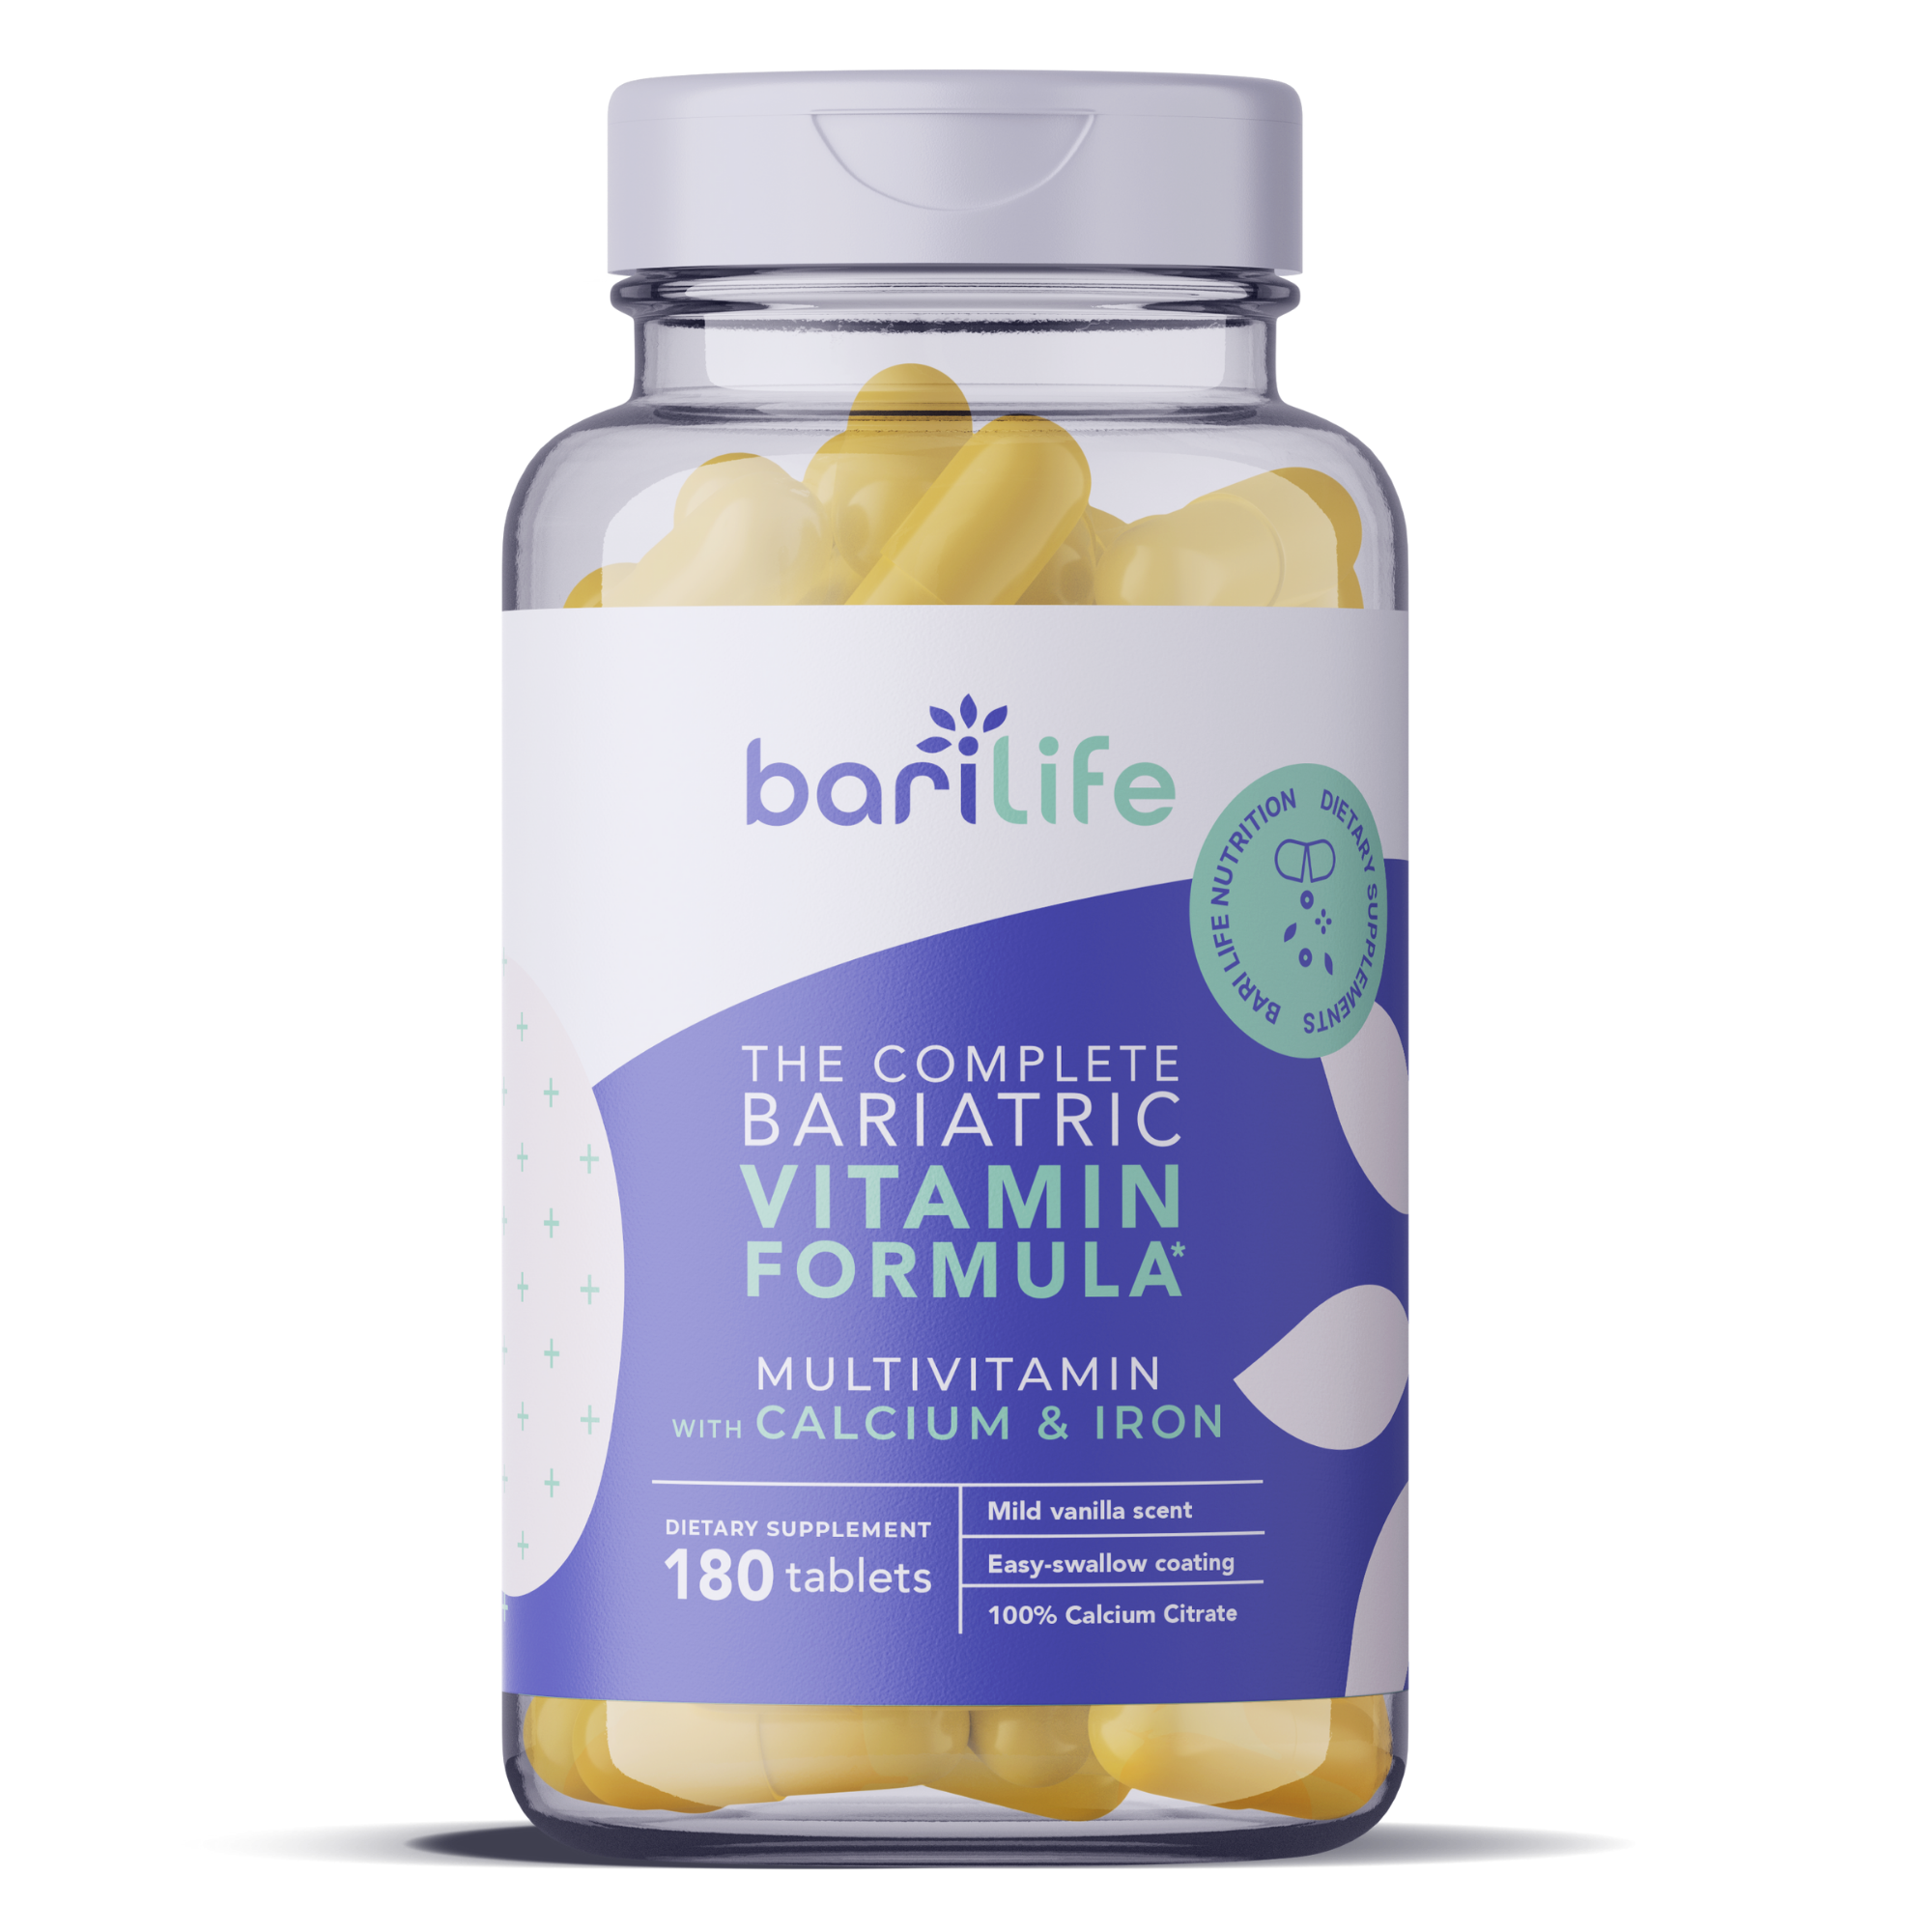 Bari Life Complete "All-In-One" Bariatric Multivitamin Tablets (Non-Chewable) - High-quality Multivitamins by Bari Life at 